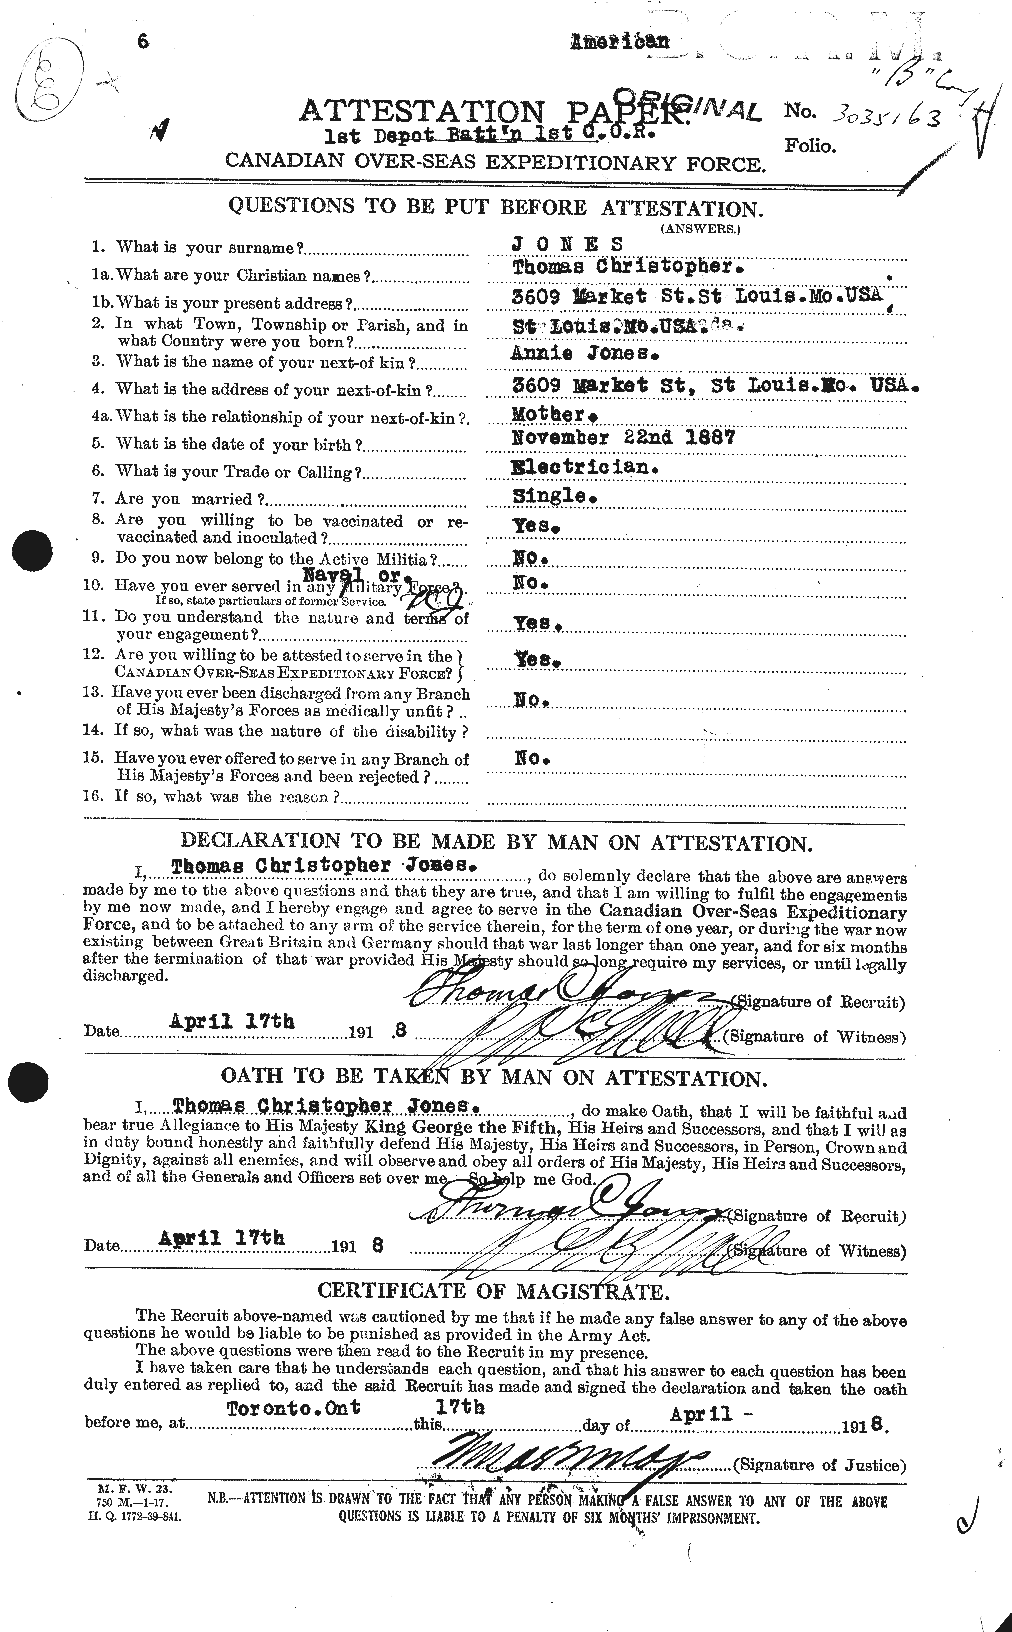 Personnel Records of the First World War - CEF 426625a